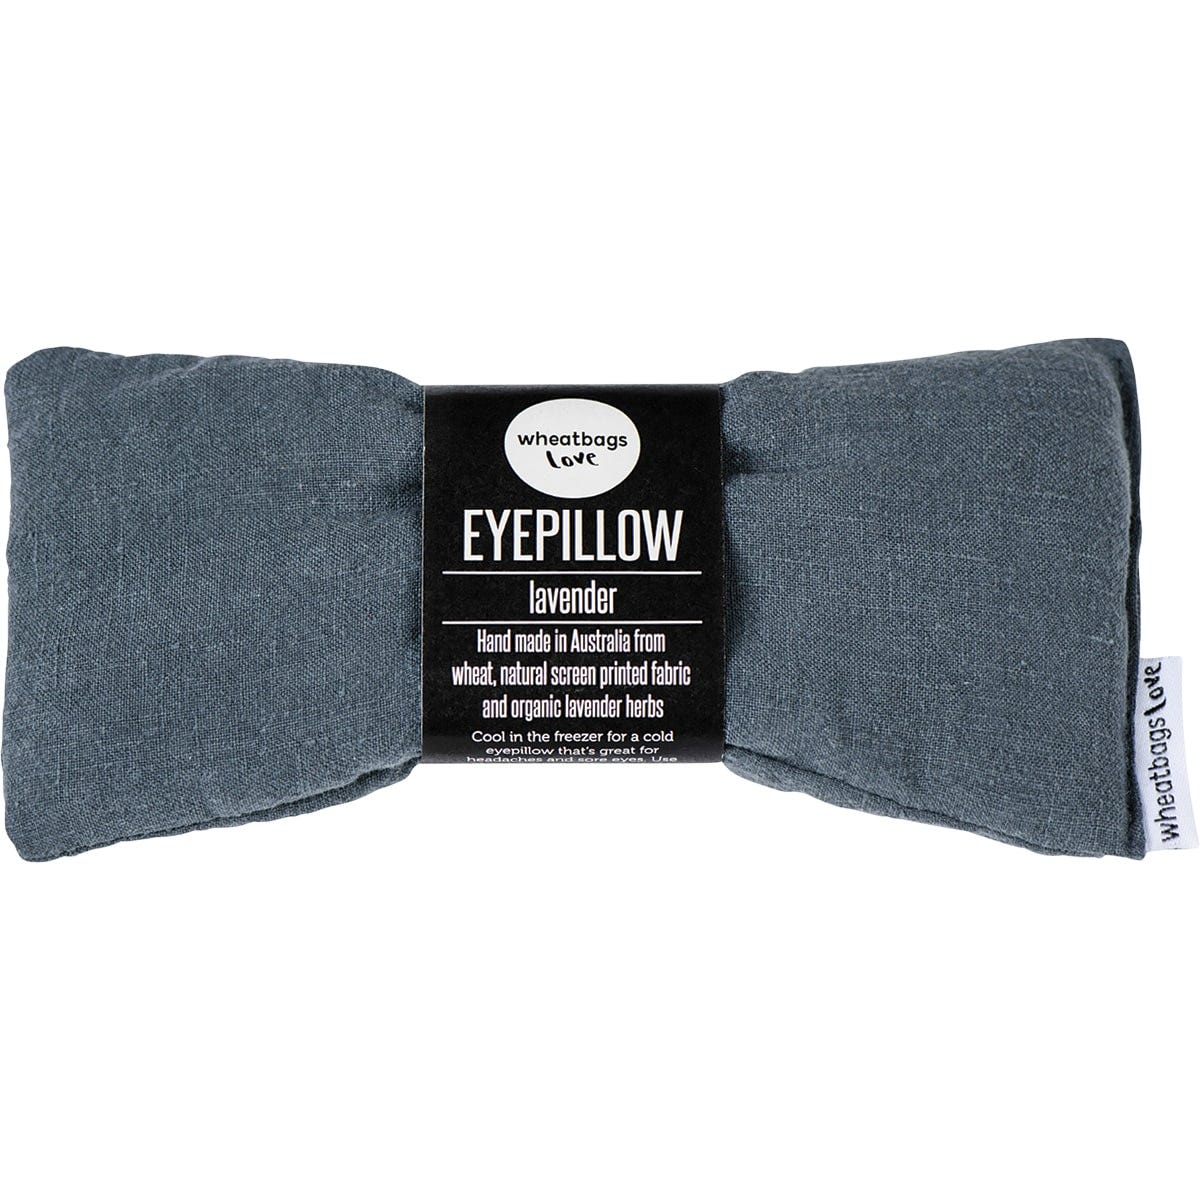 Wheatbags Love Eyepillow Luxe Linen Slate Lavender Scented - Dr Earth - Sleep & Relax